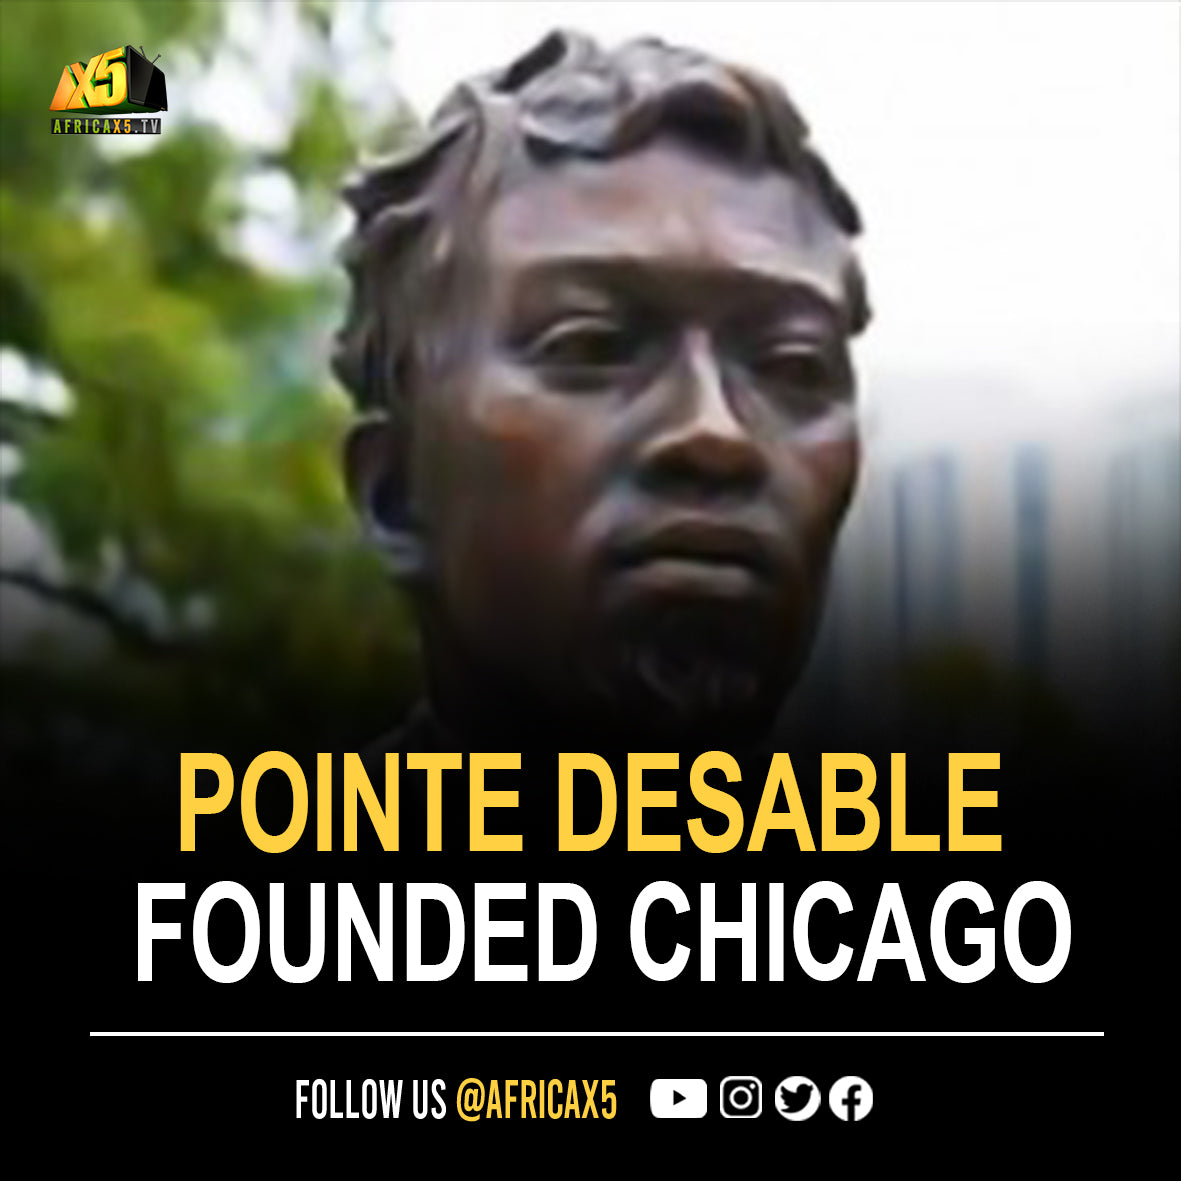 On this day in 1750, Jean Baptist Pointe Desable was born. He founded the city of Chicago.